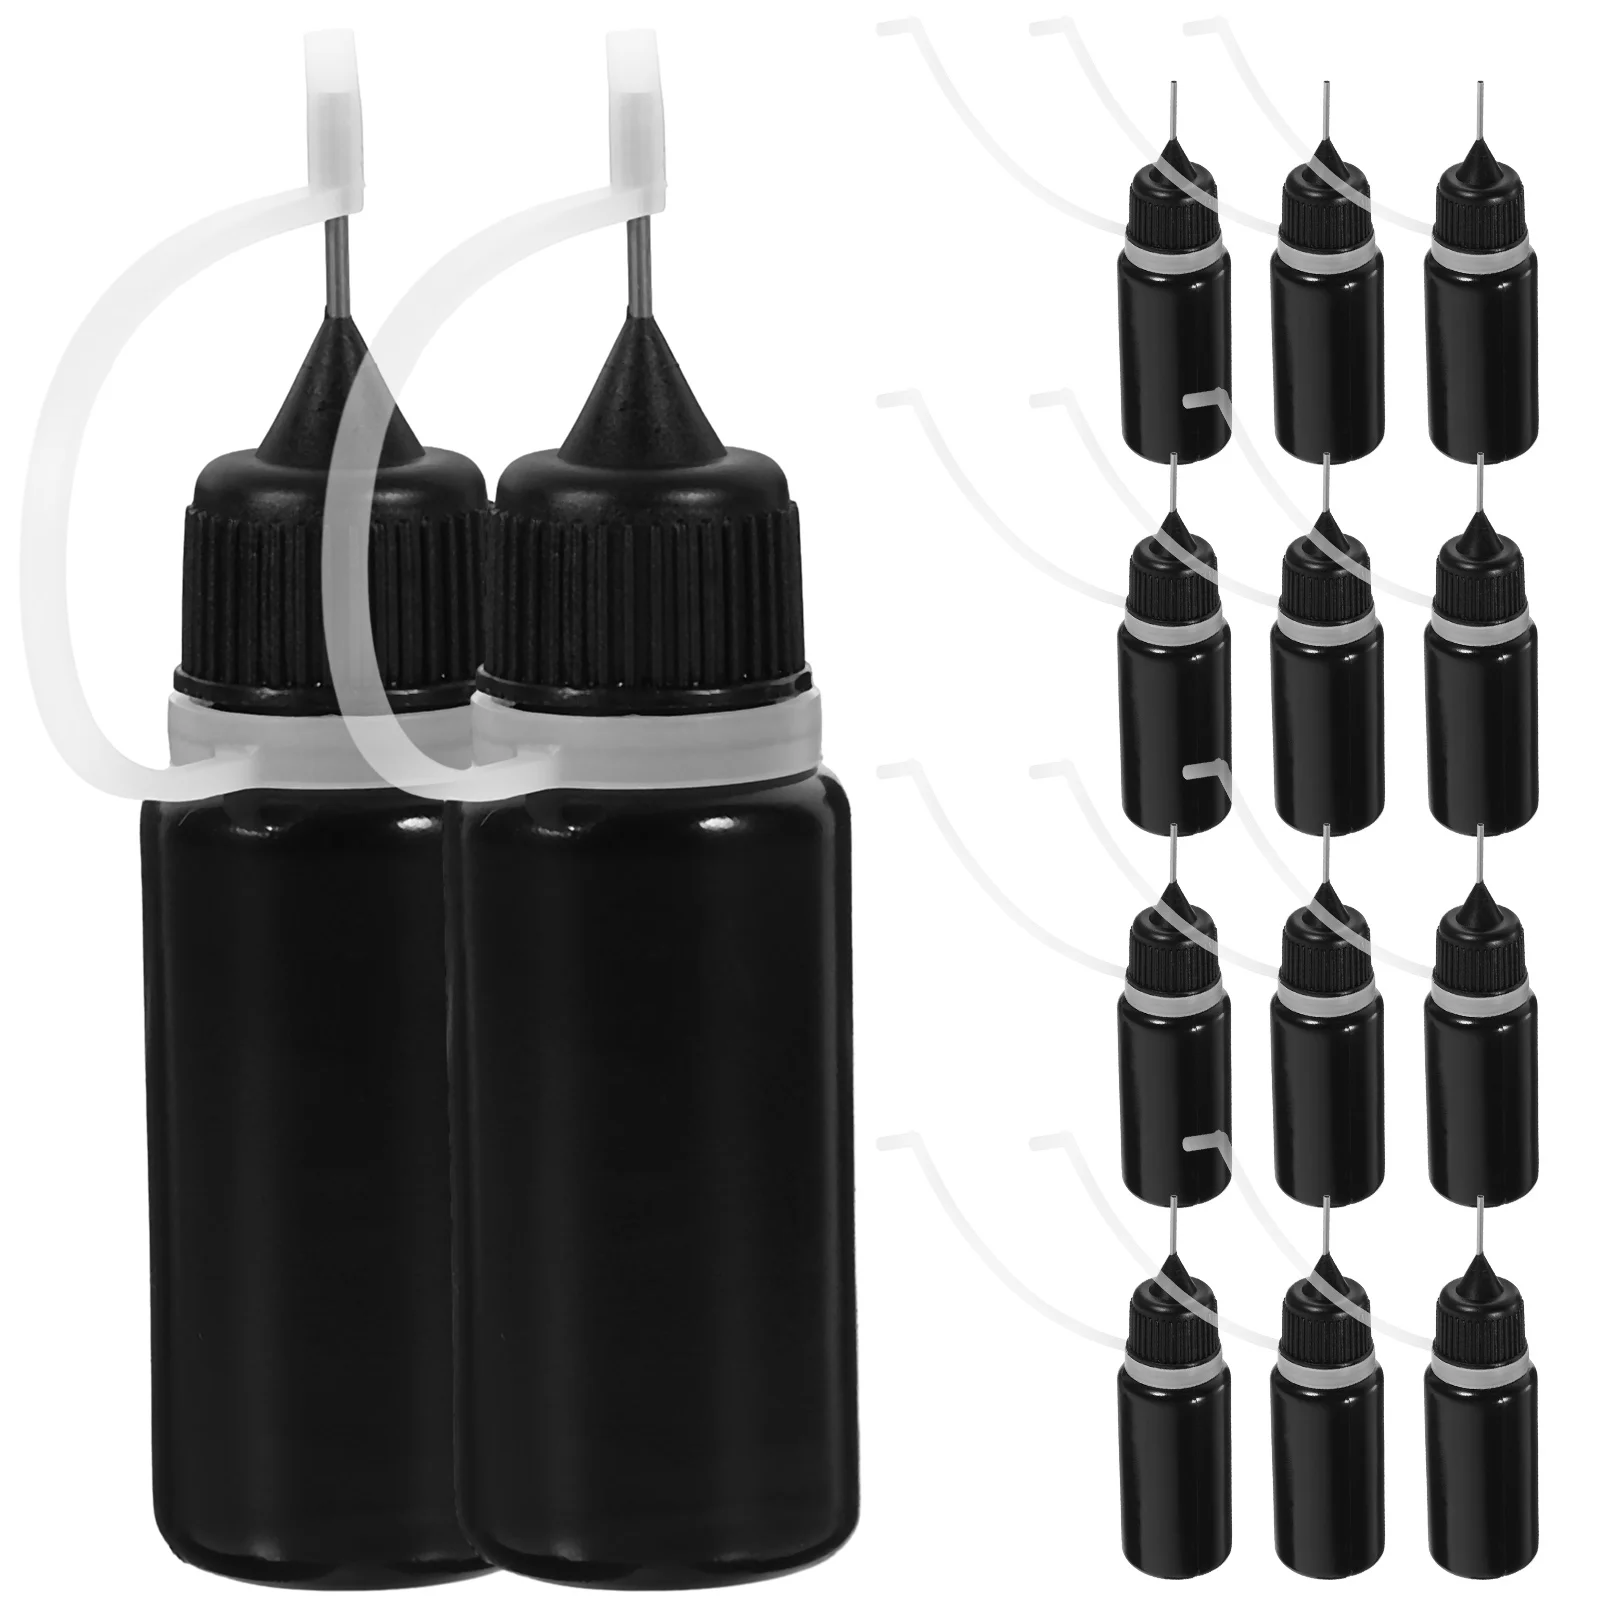 20 Pcs Bottled Squeeze Bottles Glue with Fine Tip for Liquids Needle Small Stainless Steel Precision Applicator Dispenser strong caster glue stainless steel aluminum alloy metal repair radiator water tank strong high temperature resistant ab glue